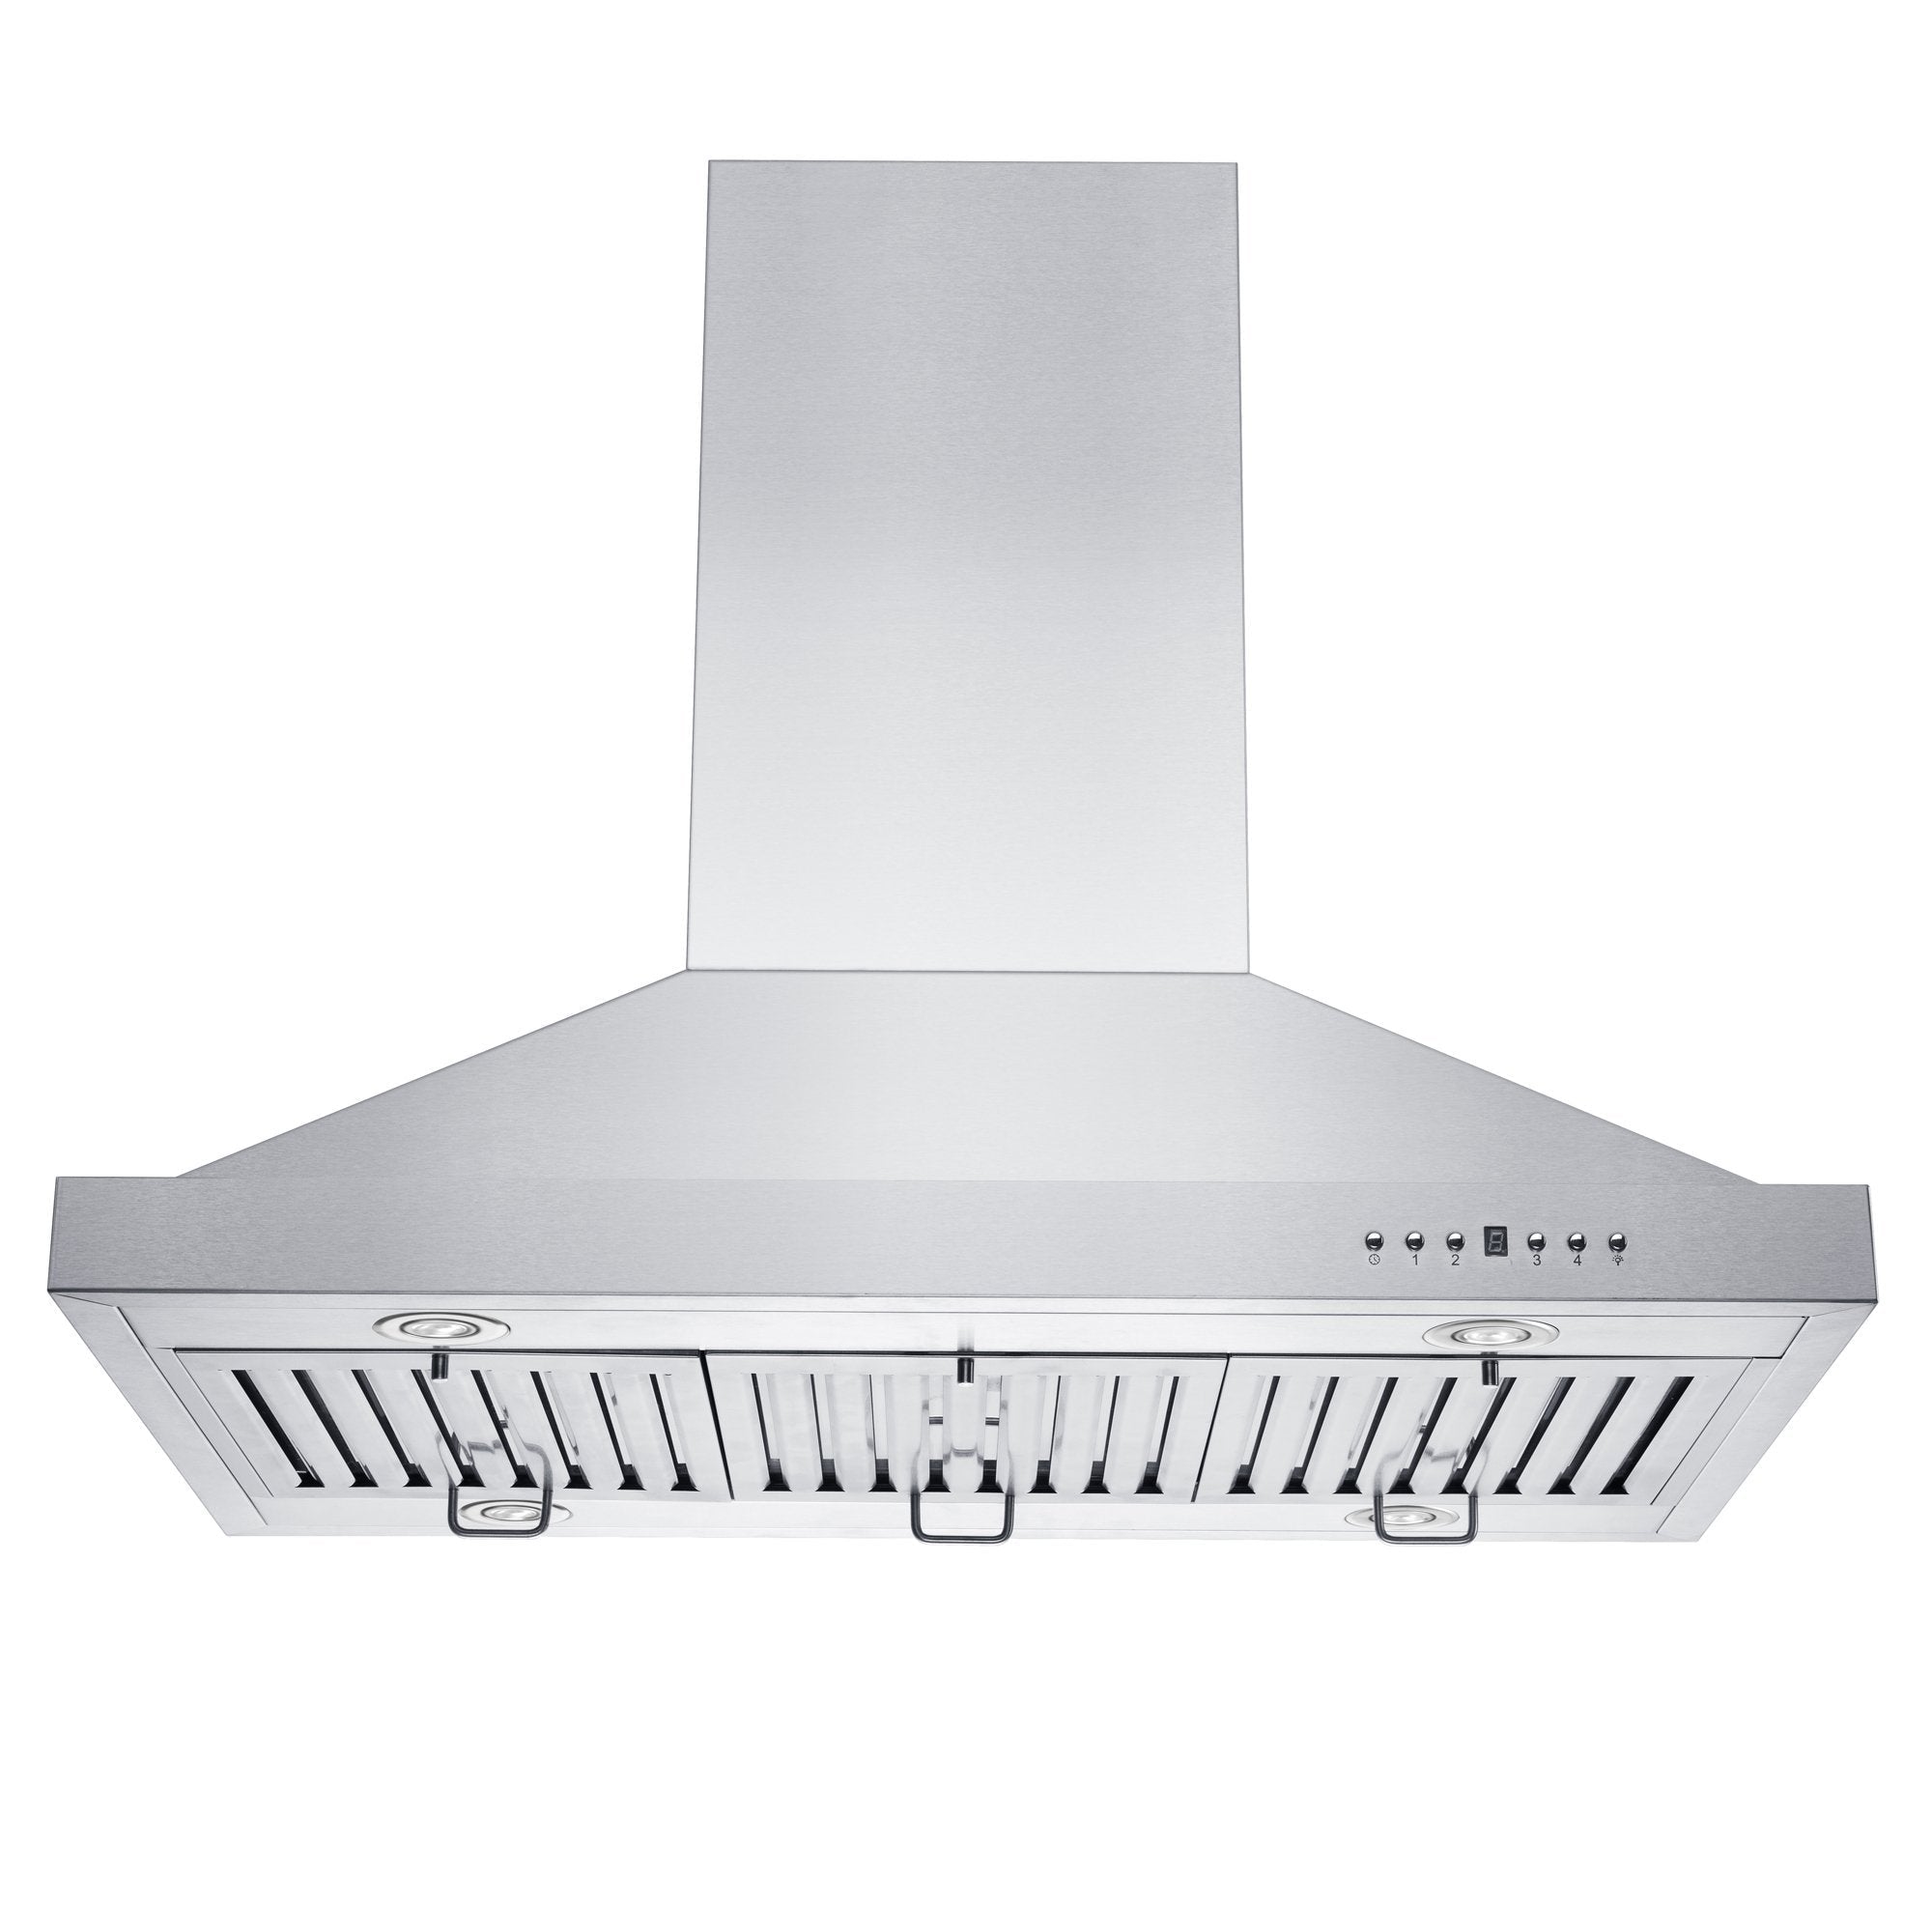 ZLINE Convertible Vent Island Mount Range Hood in Stainless Steel (GL2i) front under view of LED lighting and baffle filters.